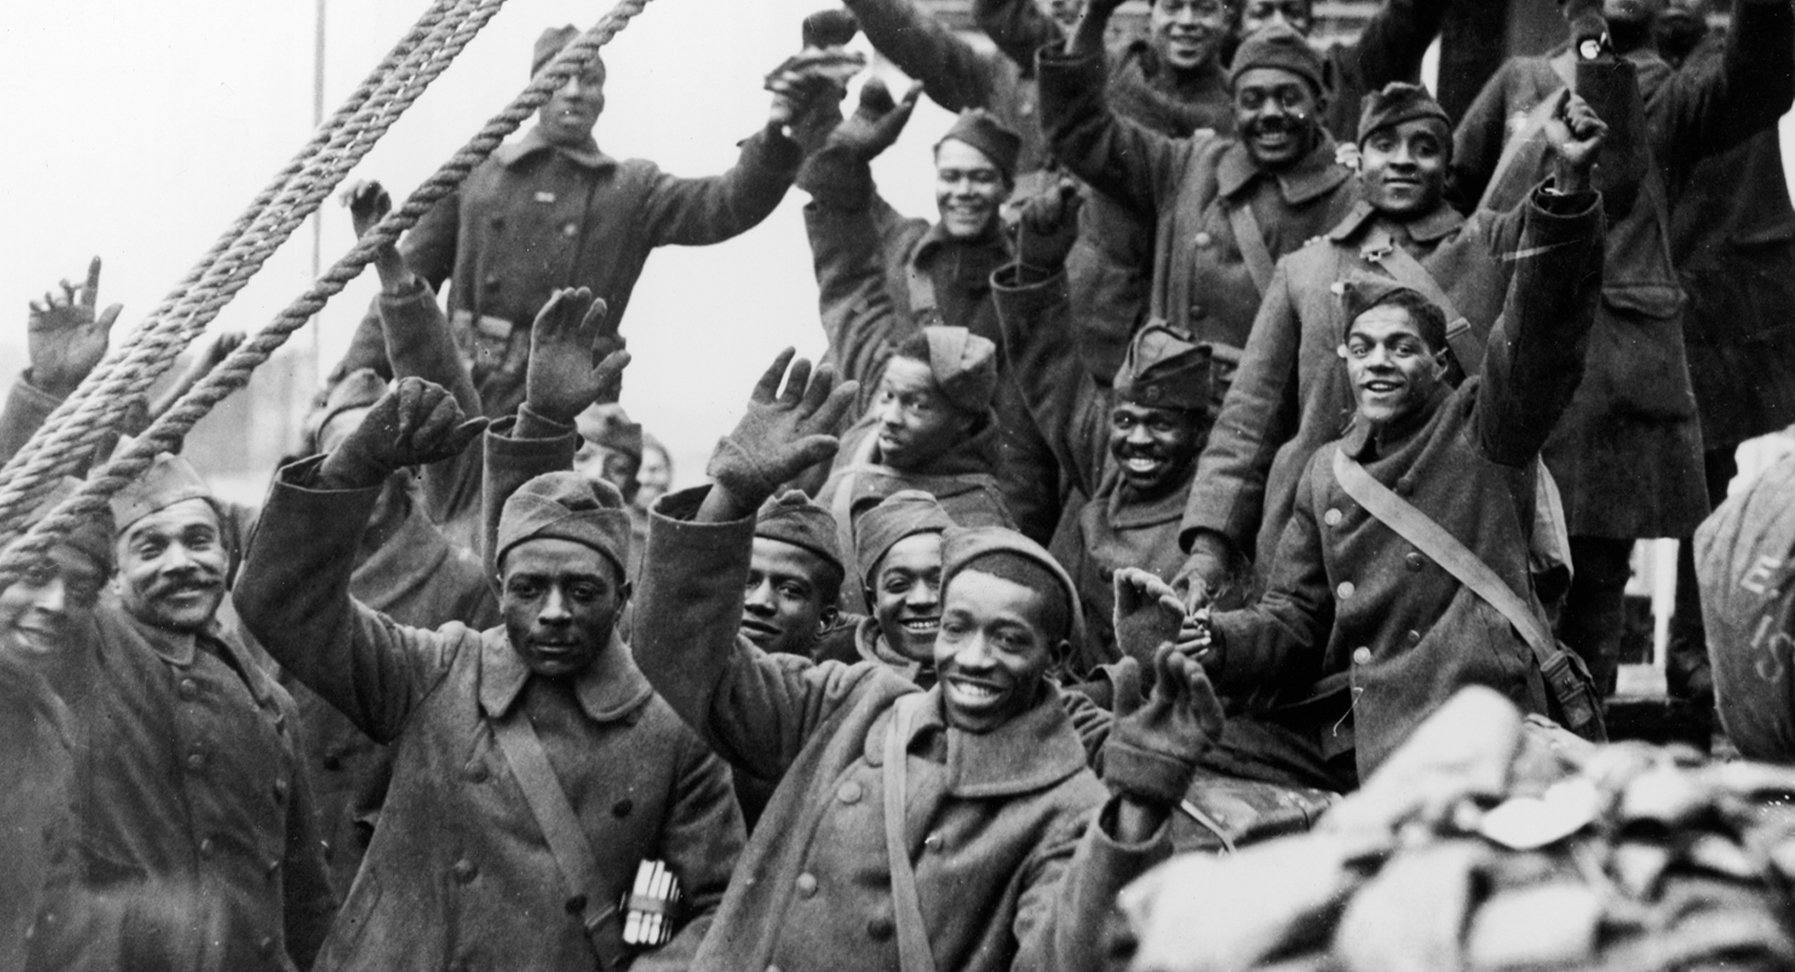 Black History Month: The Harlem Hellfighters